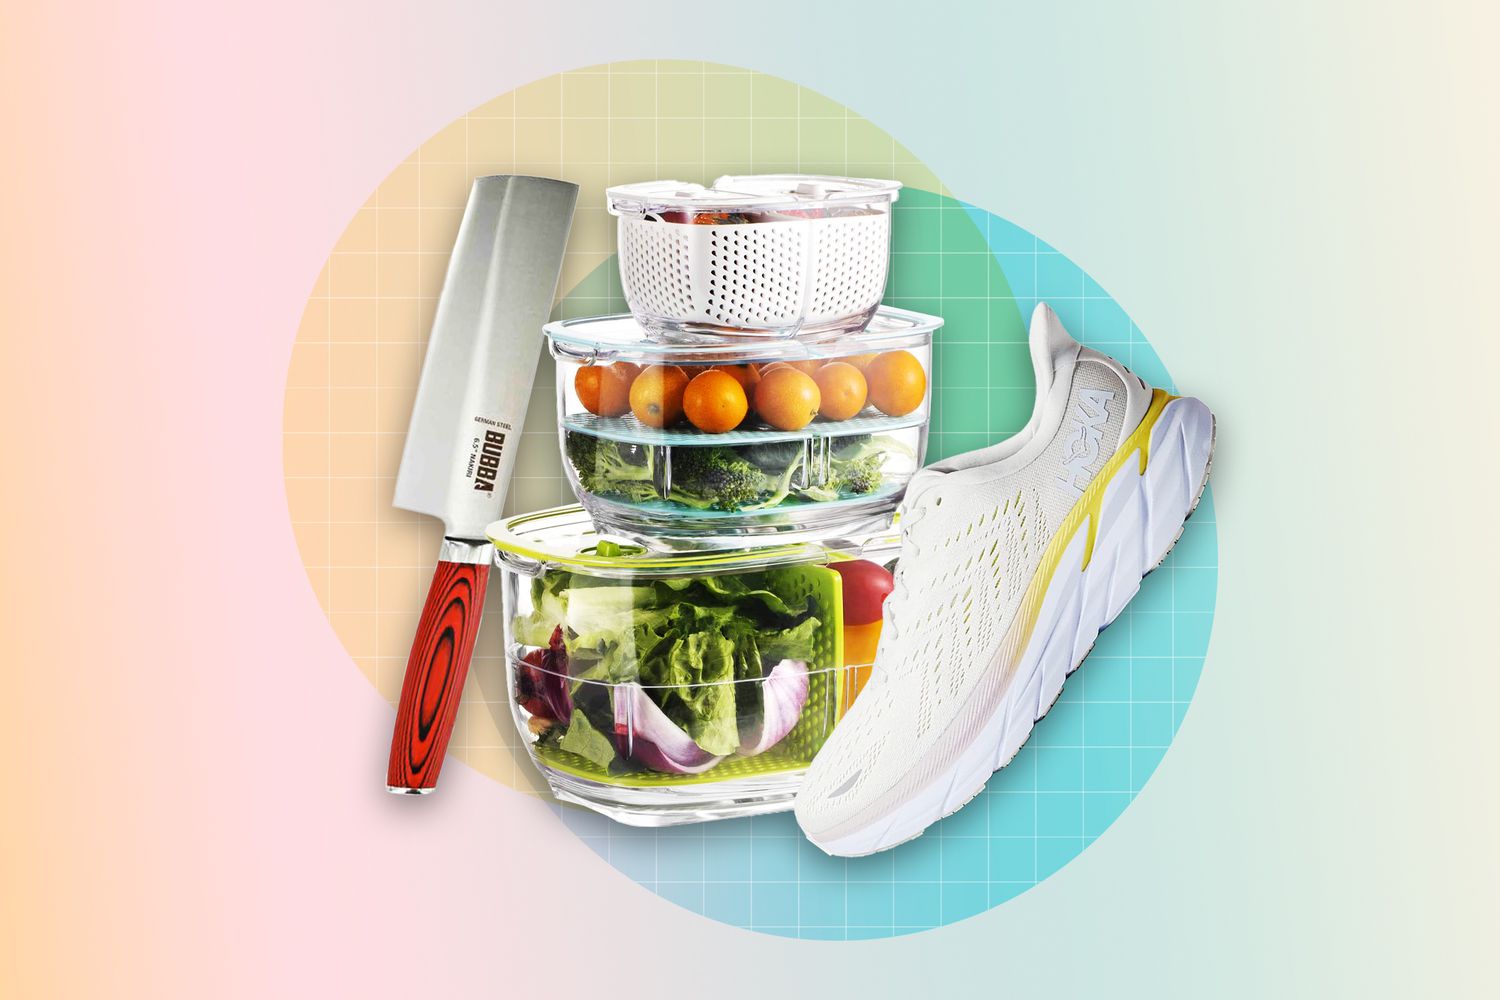 A kitchen knife, stack of tub-ware, and a running shoe on a designed background